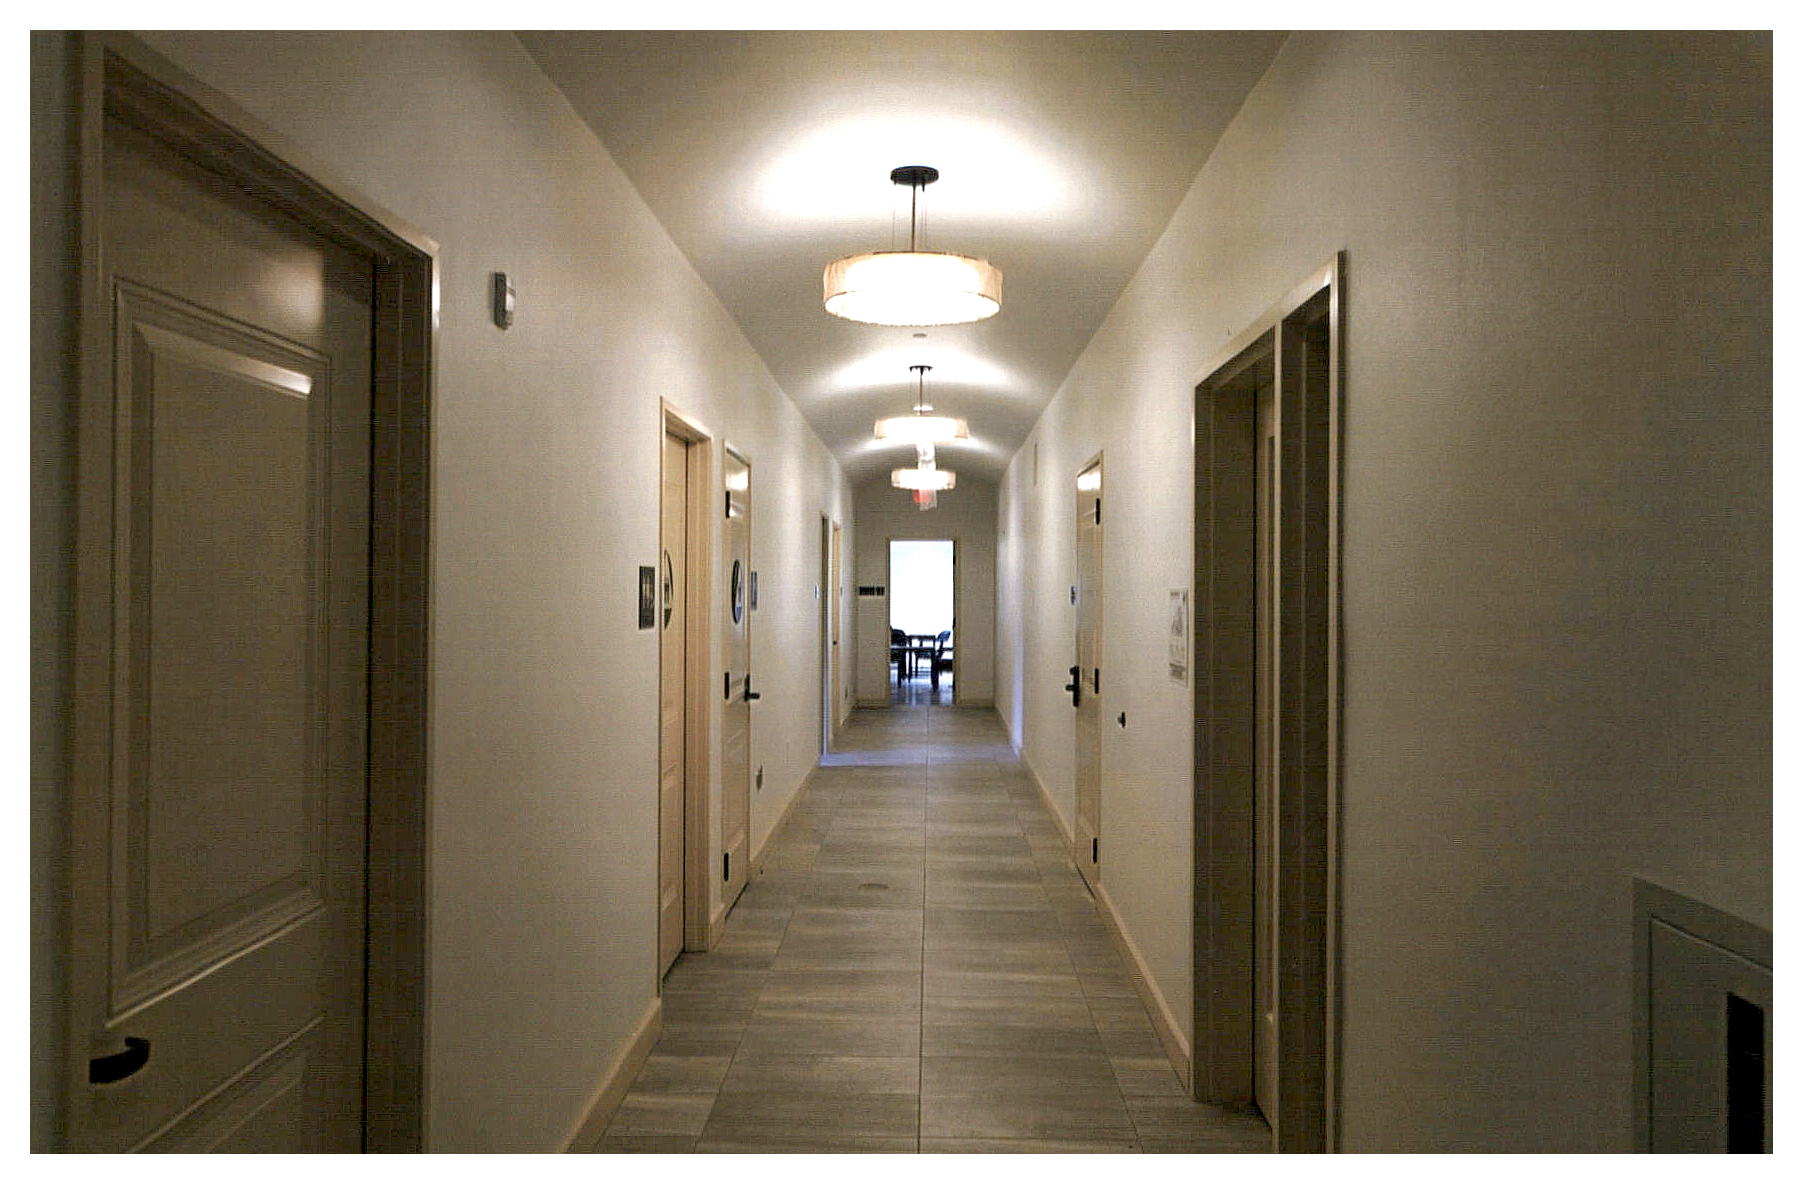 After: view of another hallway with wide cylindrical pendant light fixtures suspended from a slightly arched ceiling.